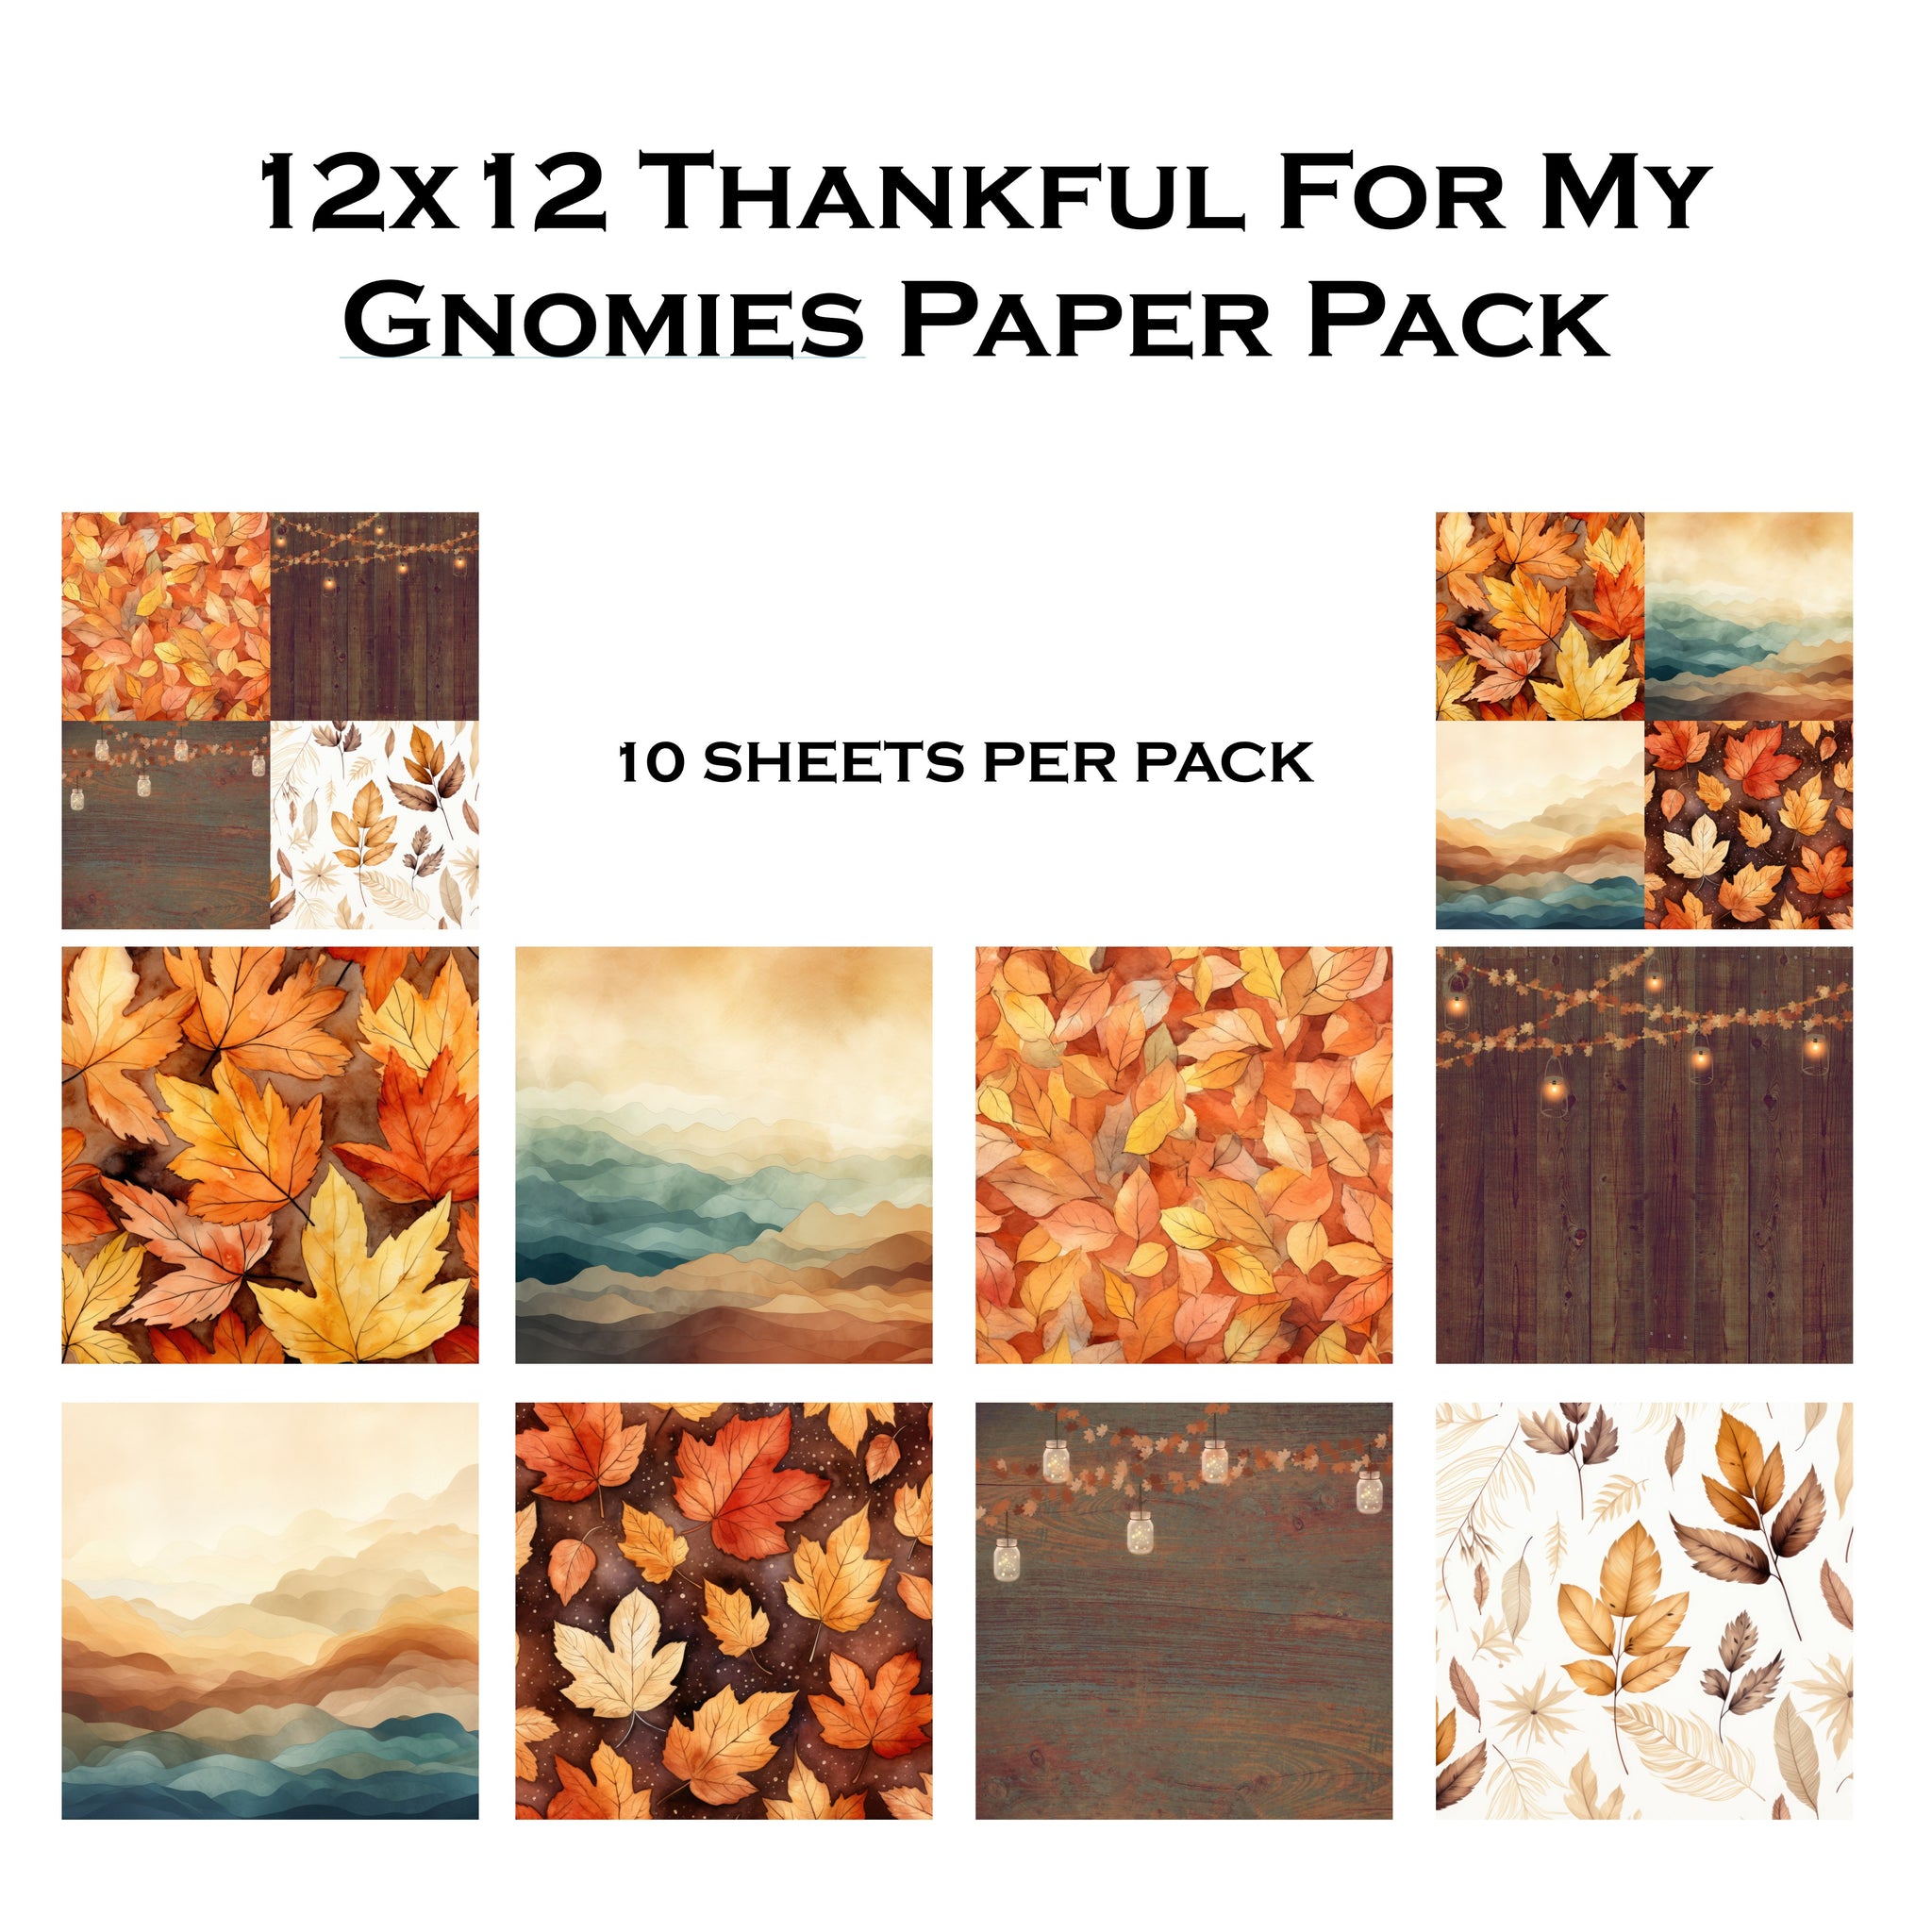 Thankful For My Gnomies 12x12 Paper Pack